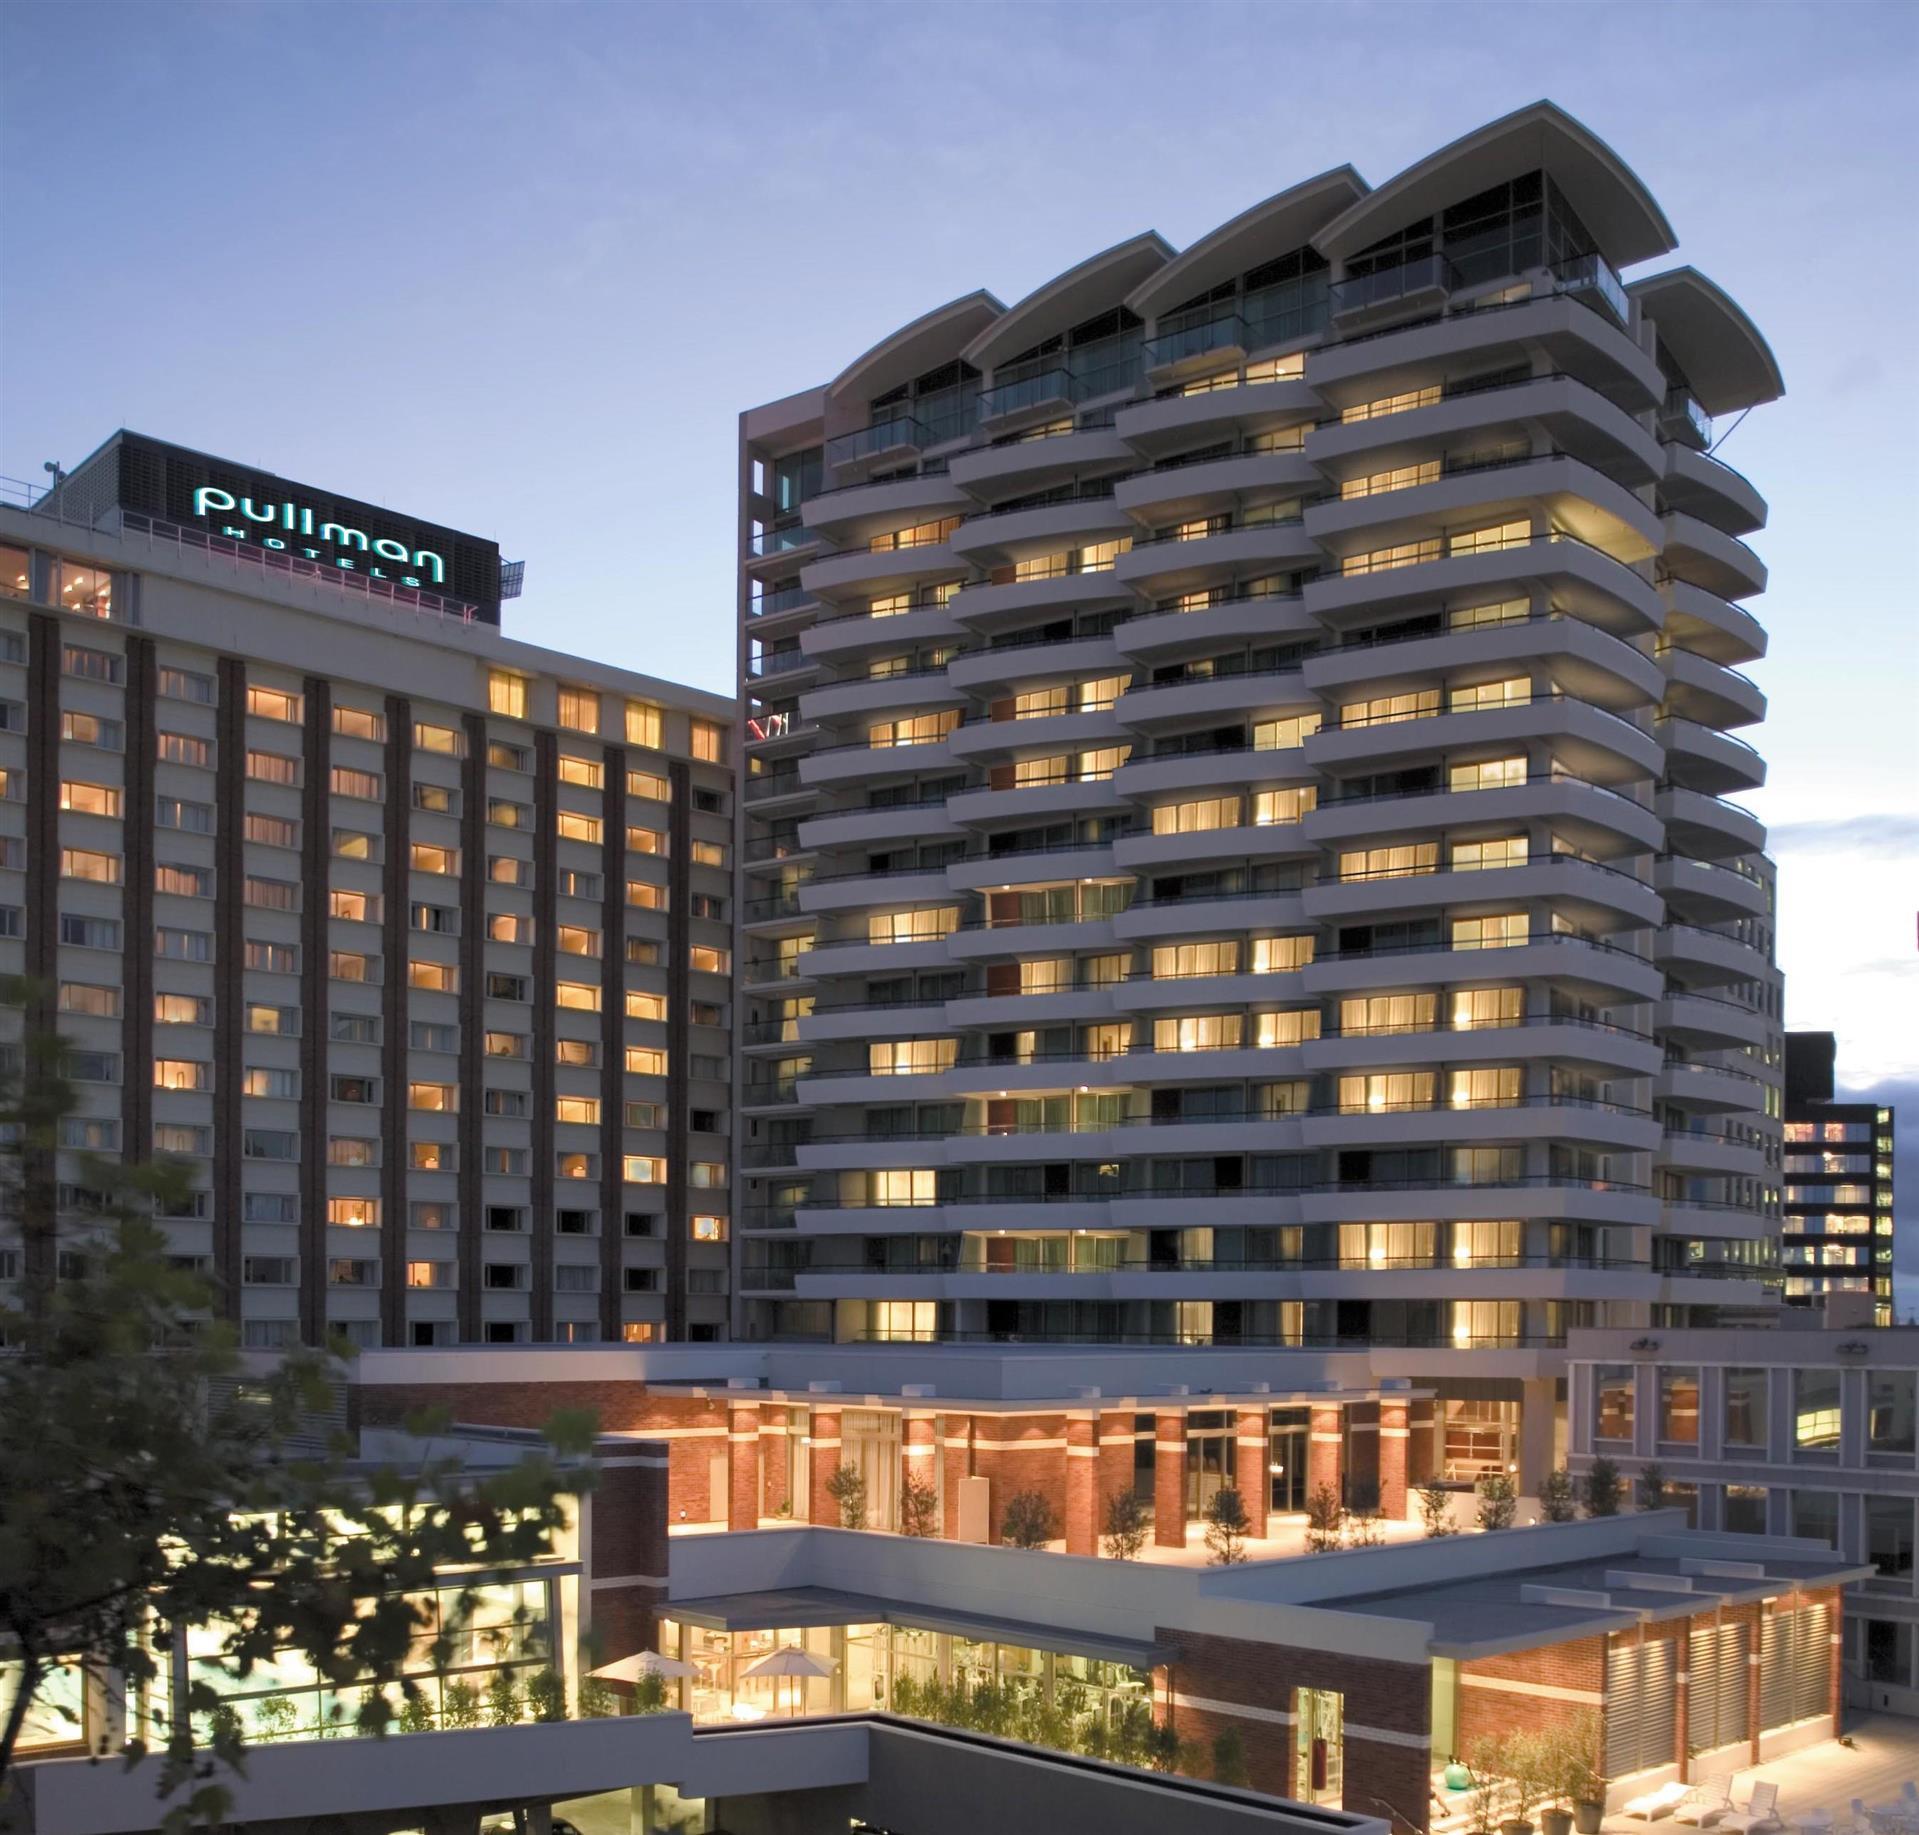 Pullman Auckland Hotel & Apartments in Auckland, NZ